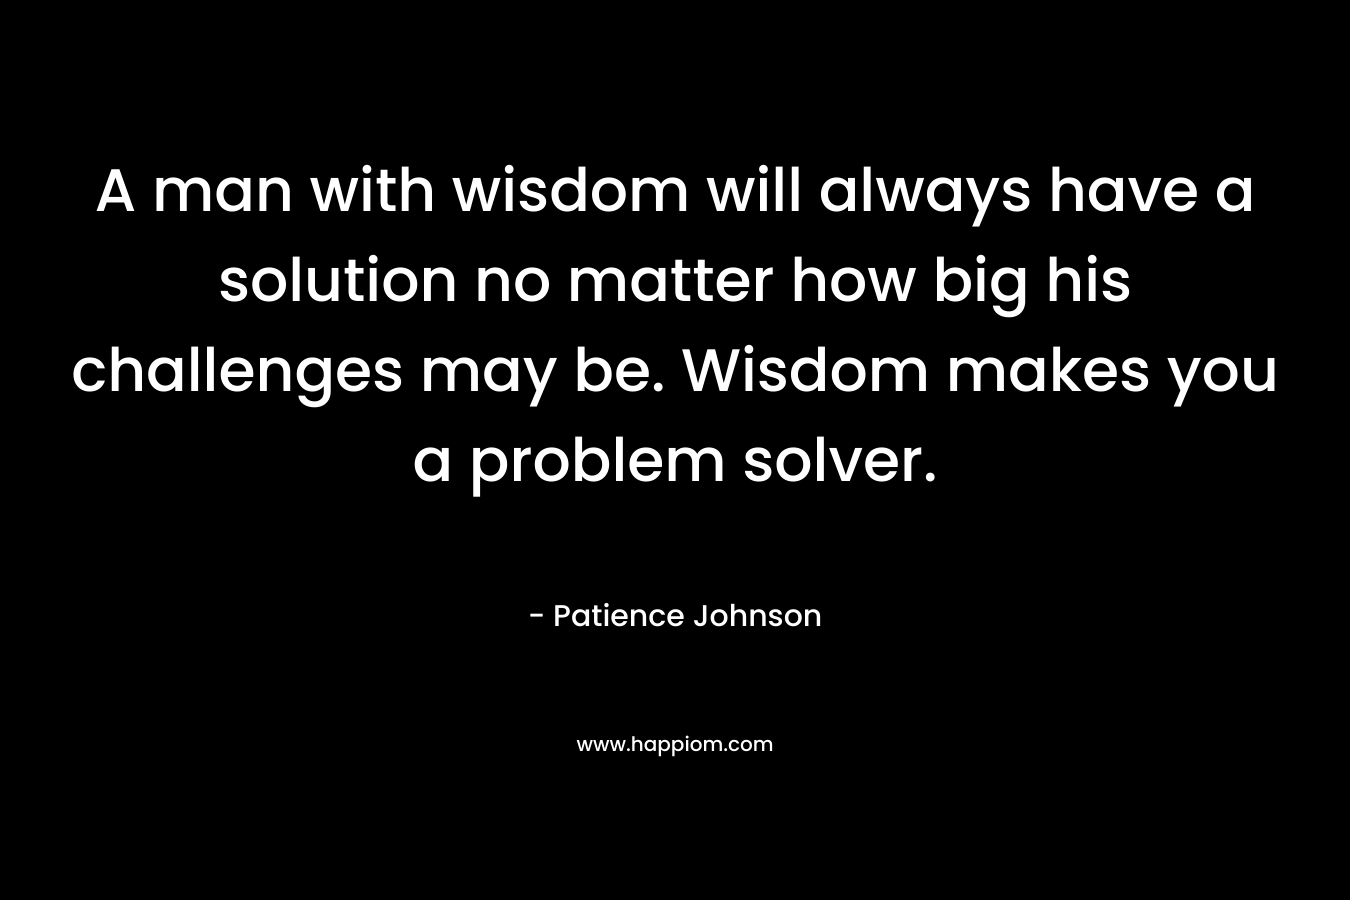 A man with wisdom will always have a solution no matter how big his challenges may be. Wisdom makes you a problem solver. – Patience Johnson